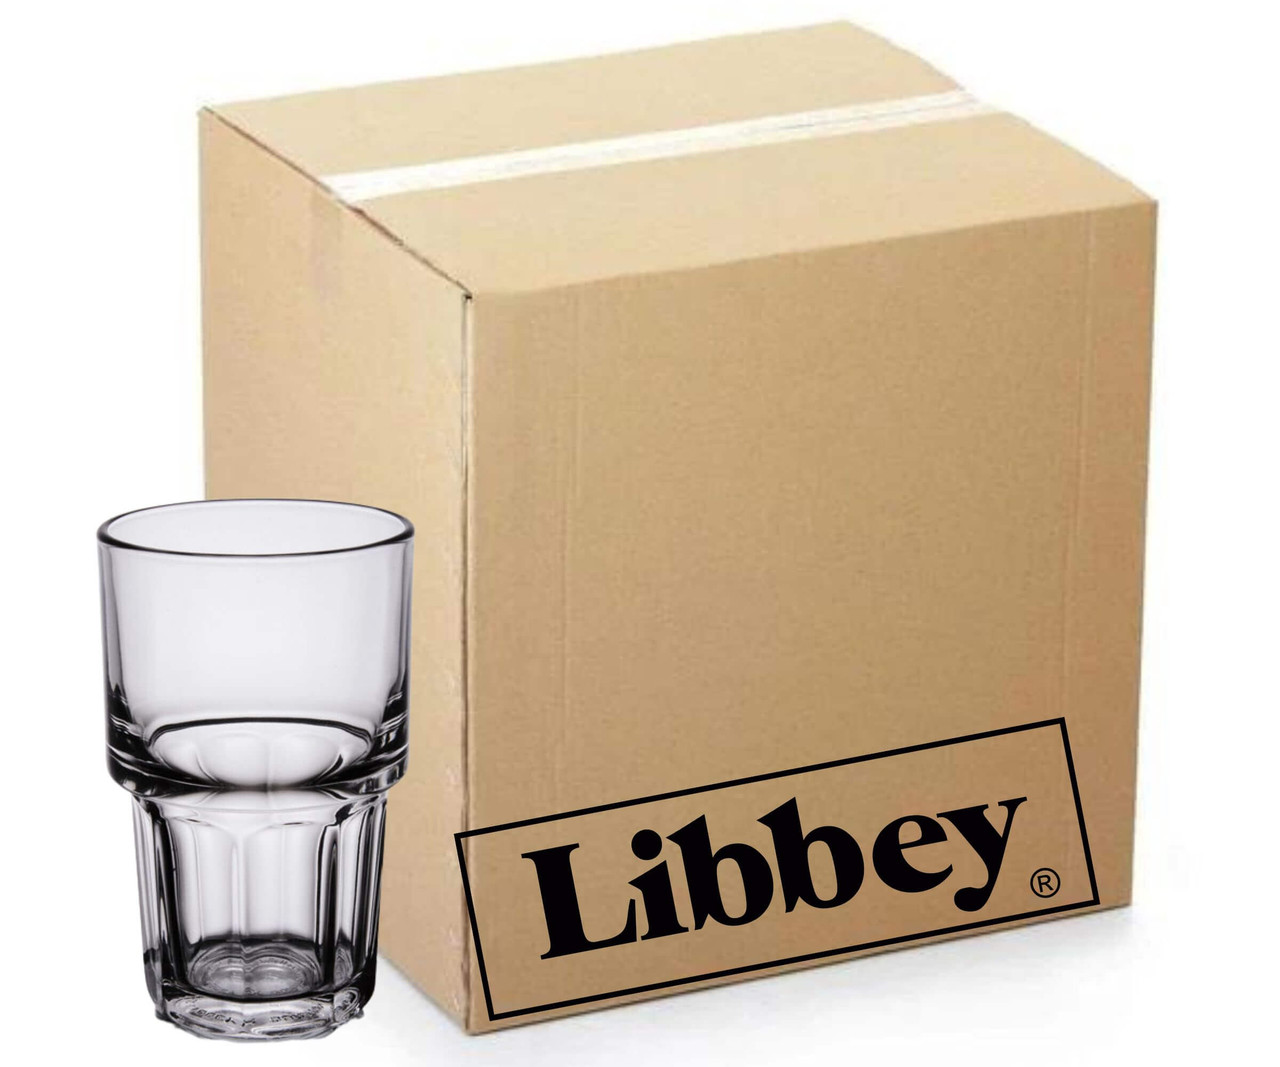 Libbey Case of 36 Gibraltar Stackable Beverage Glasses - 12 oz.-Chicken Pieces